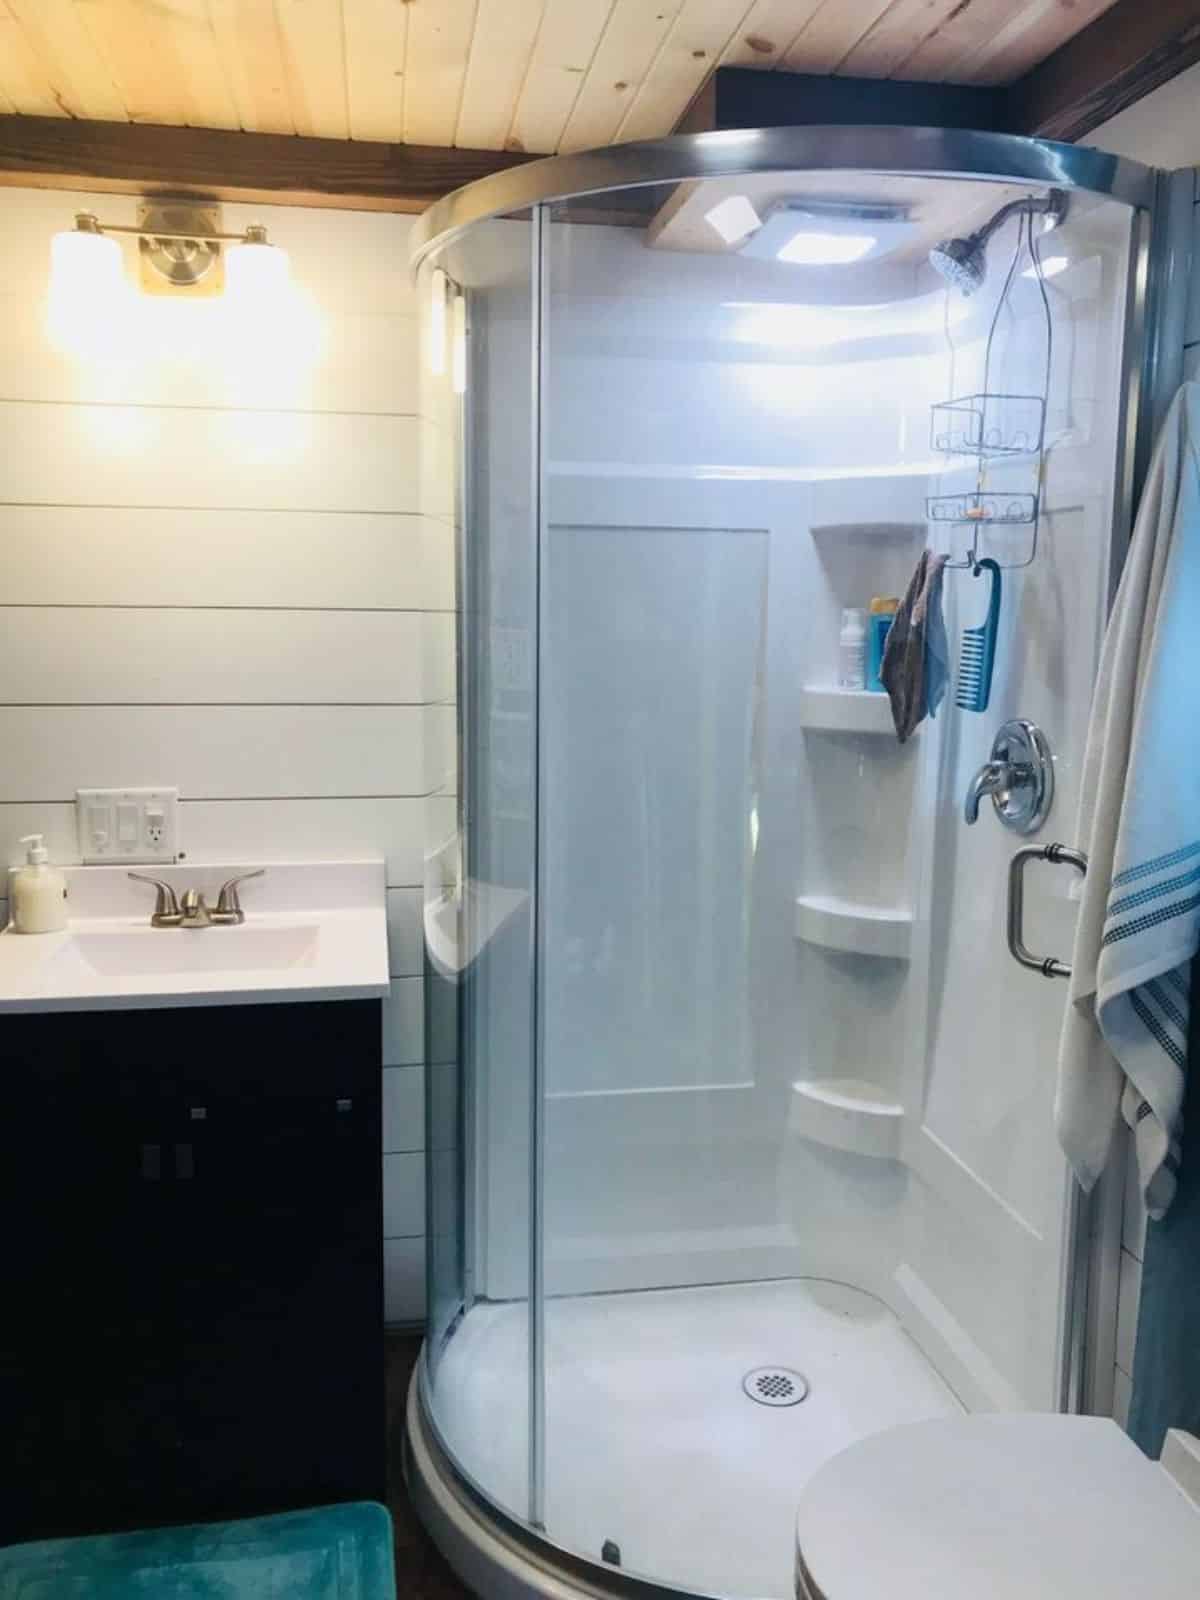 standard fittings with separate shower area with glass enclosure in bathroom of affordable 2 bedroom tiny home